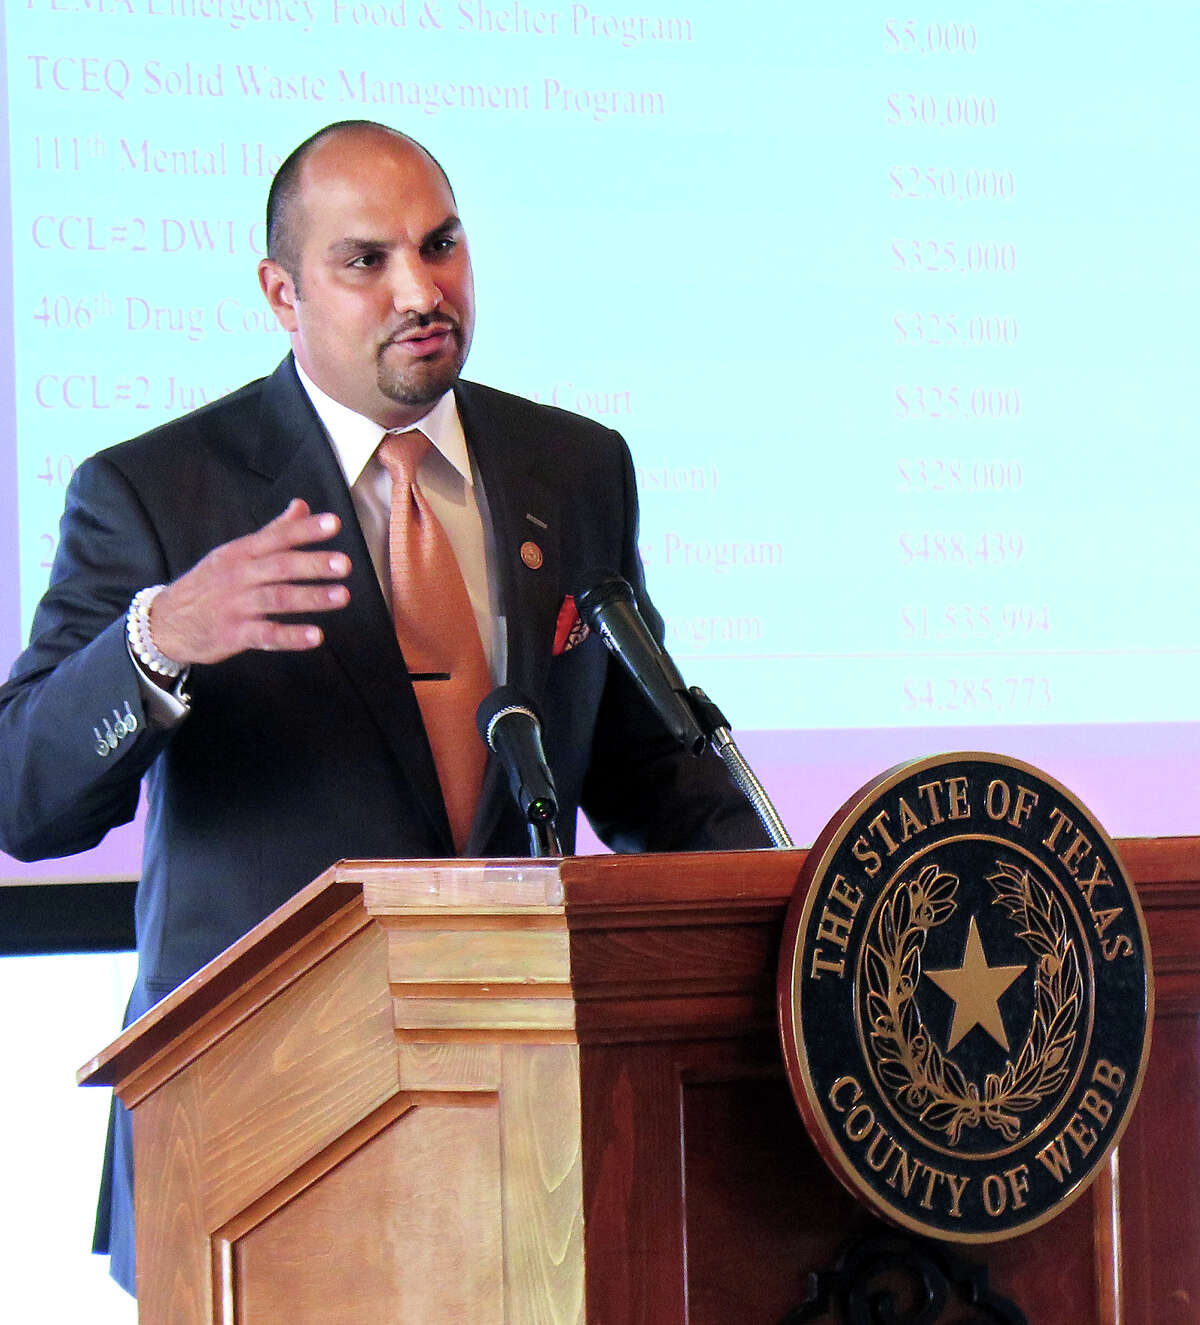 Webb County Judge Tano Tijerina presented the 2016 State of the County at the Laredo Country Club. The presentation was hosted by the Laredo Chamber of Commerce.